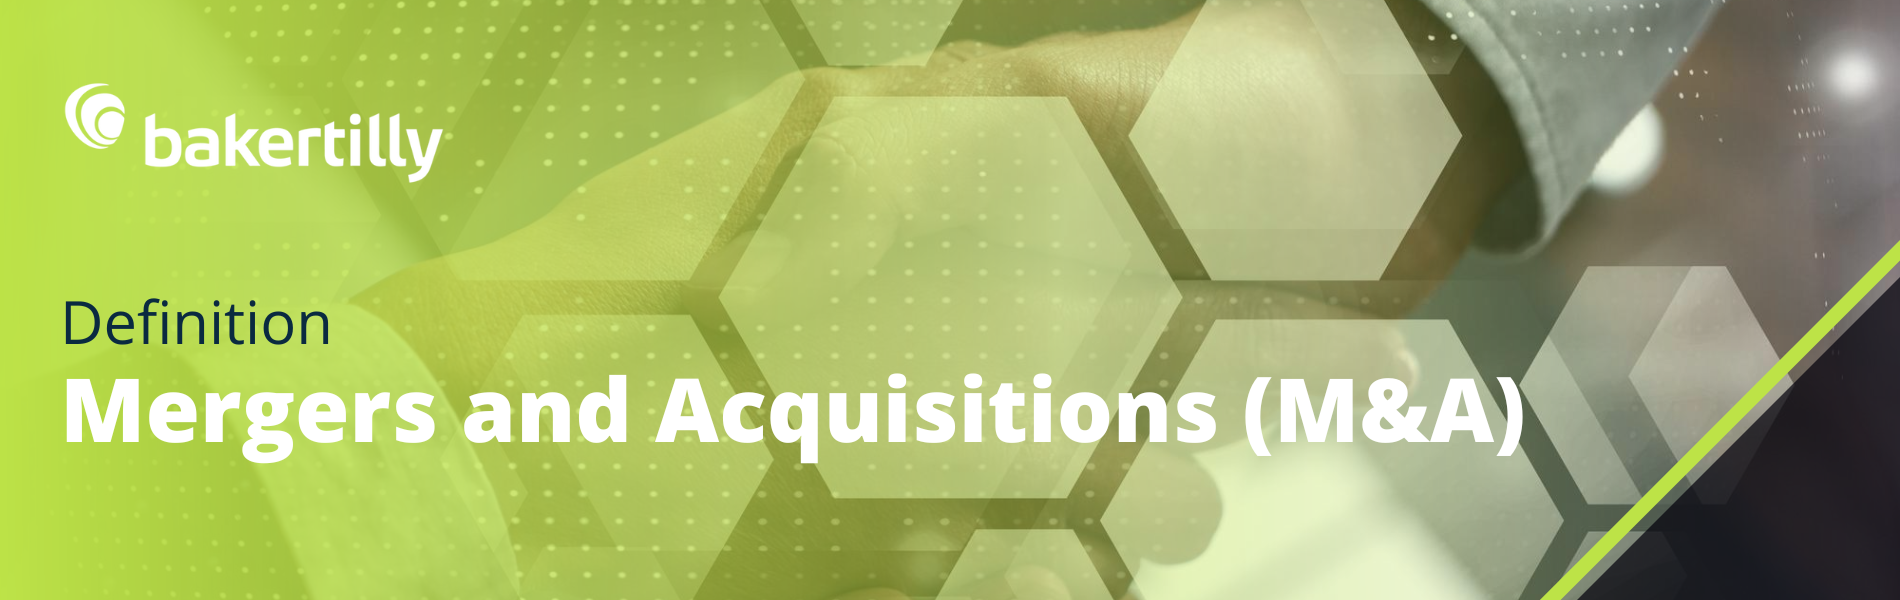 Mergers and Acquisitions: Drivers of Business Growth and Competitiveness